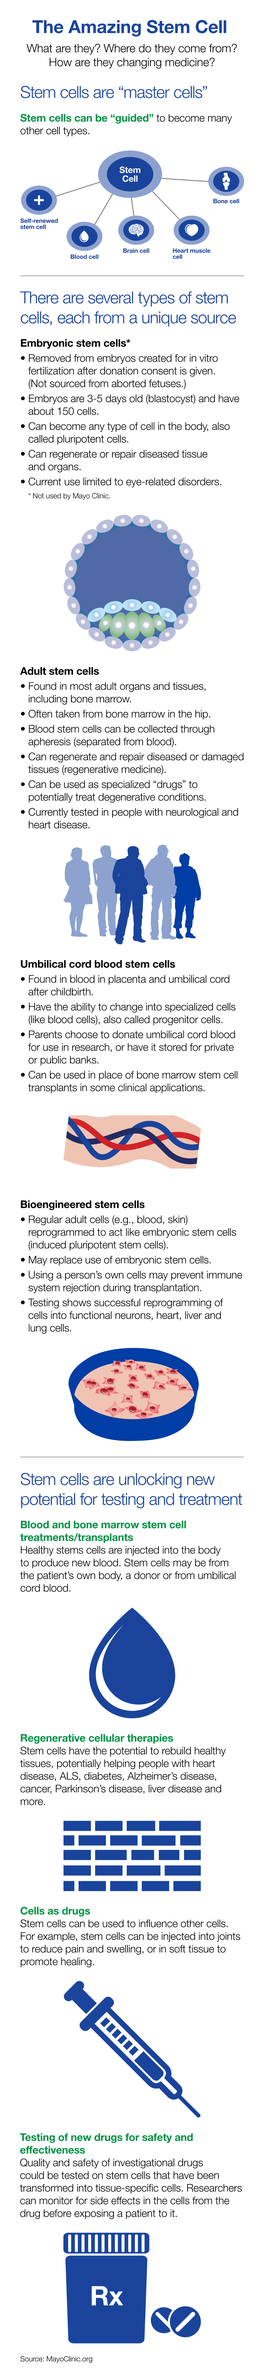 The Amazing Stem Cell What Are They? Where Do They Come From? How Are They Changing Medicine? Stem Cells Are “Master Cells”